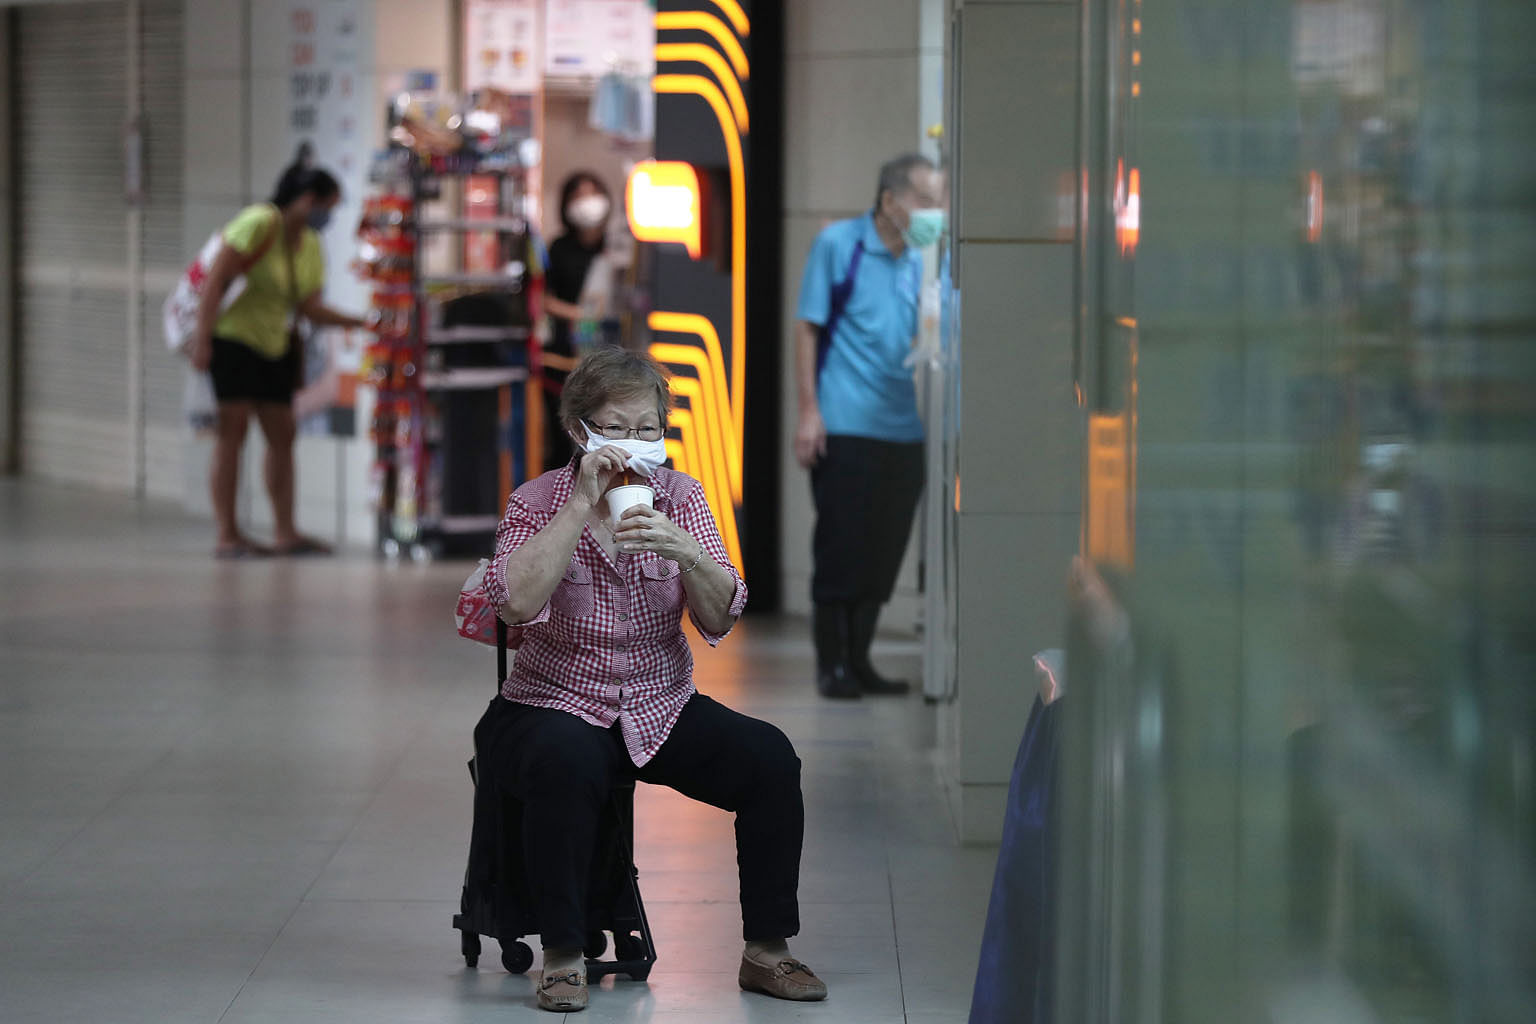 A woman resting on her trolley chair at Clementi bus interchange last Thursday. Tighter restrictions on the movement and gathering of people have thinned out crowds at public places. 